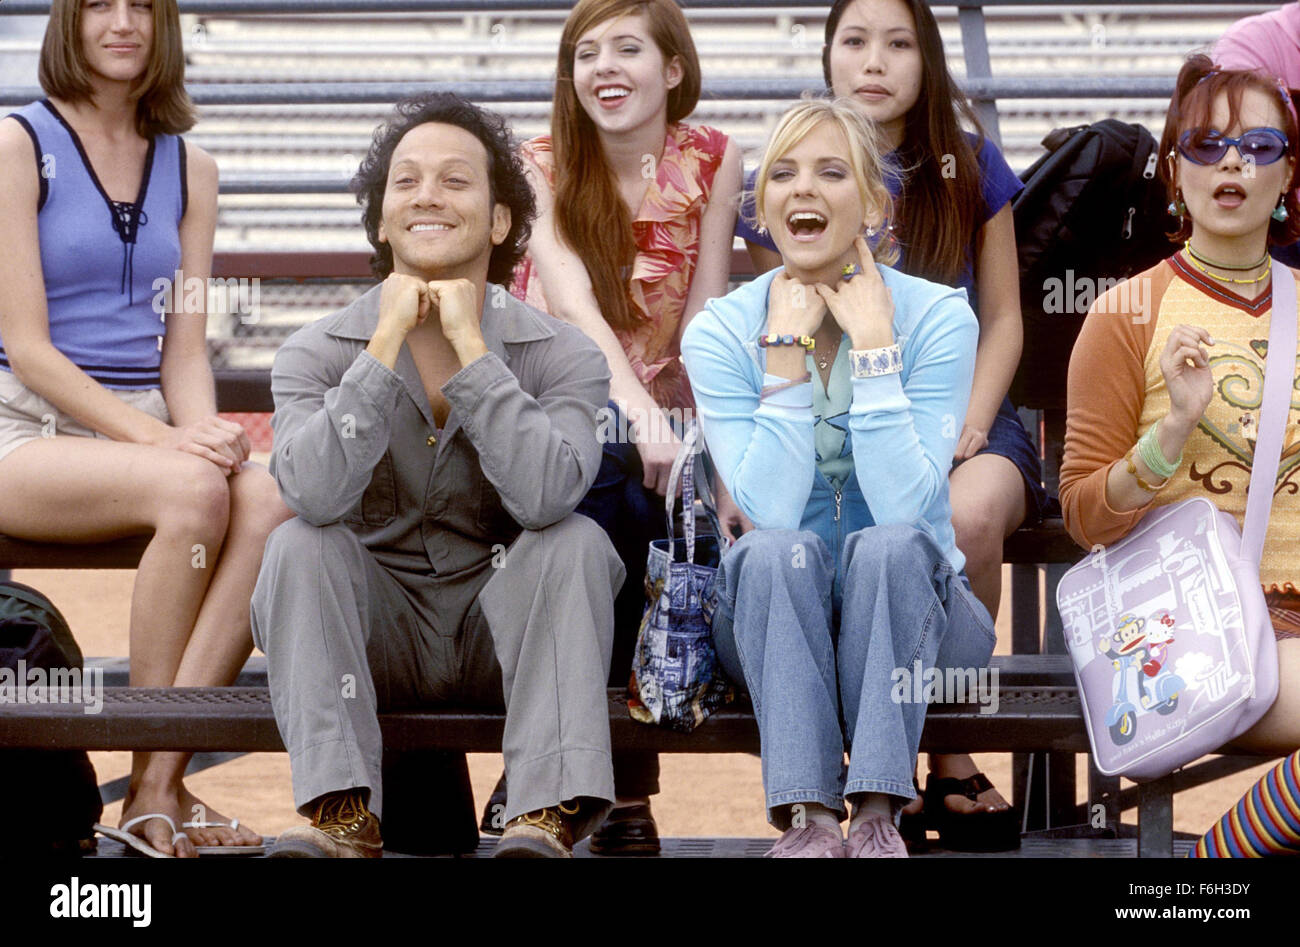 Apr 20, 2002; Hollywood, CA, USA; Actors ROB SCHNEIDER as Jessica and ANNA FARIS as April in the comedy 'The Hot Chick' directed  by Tom Brady. Stock Photo